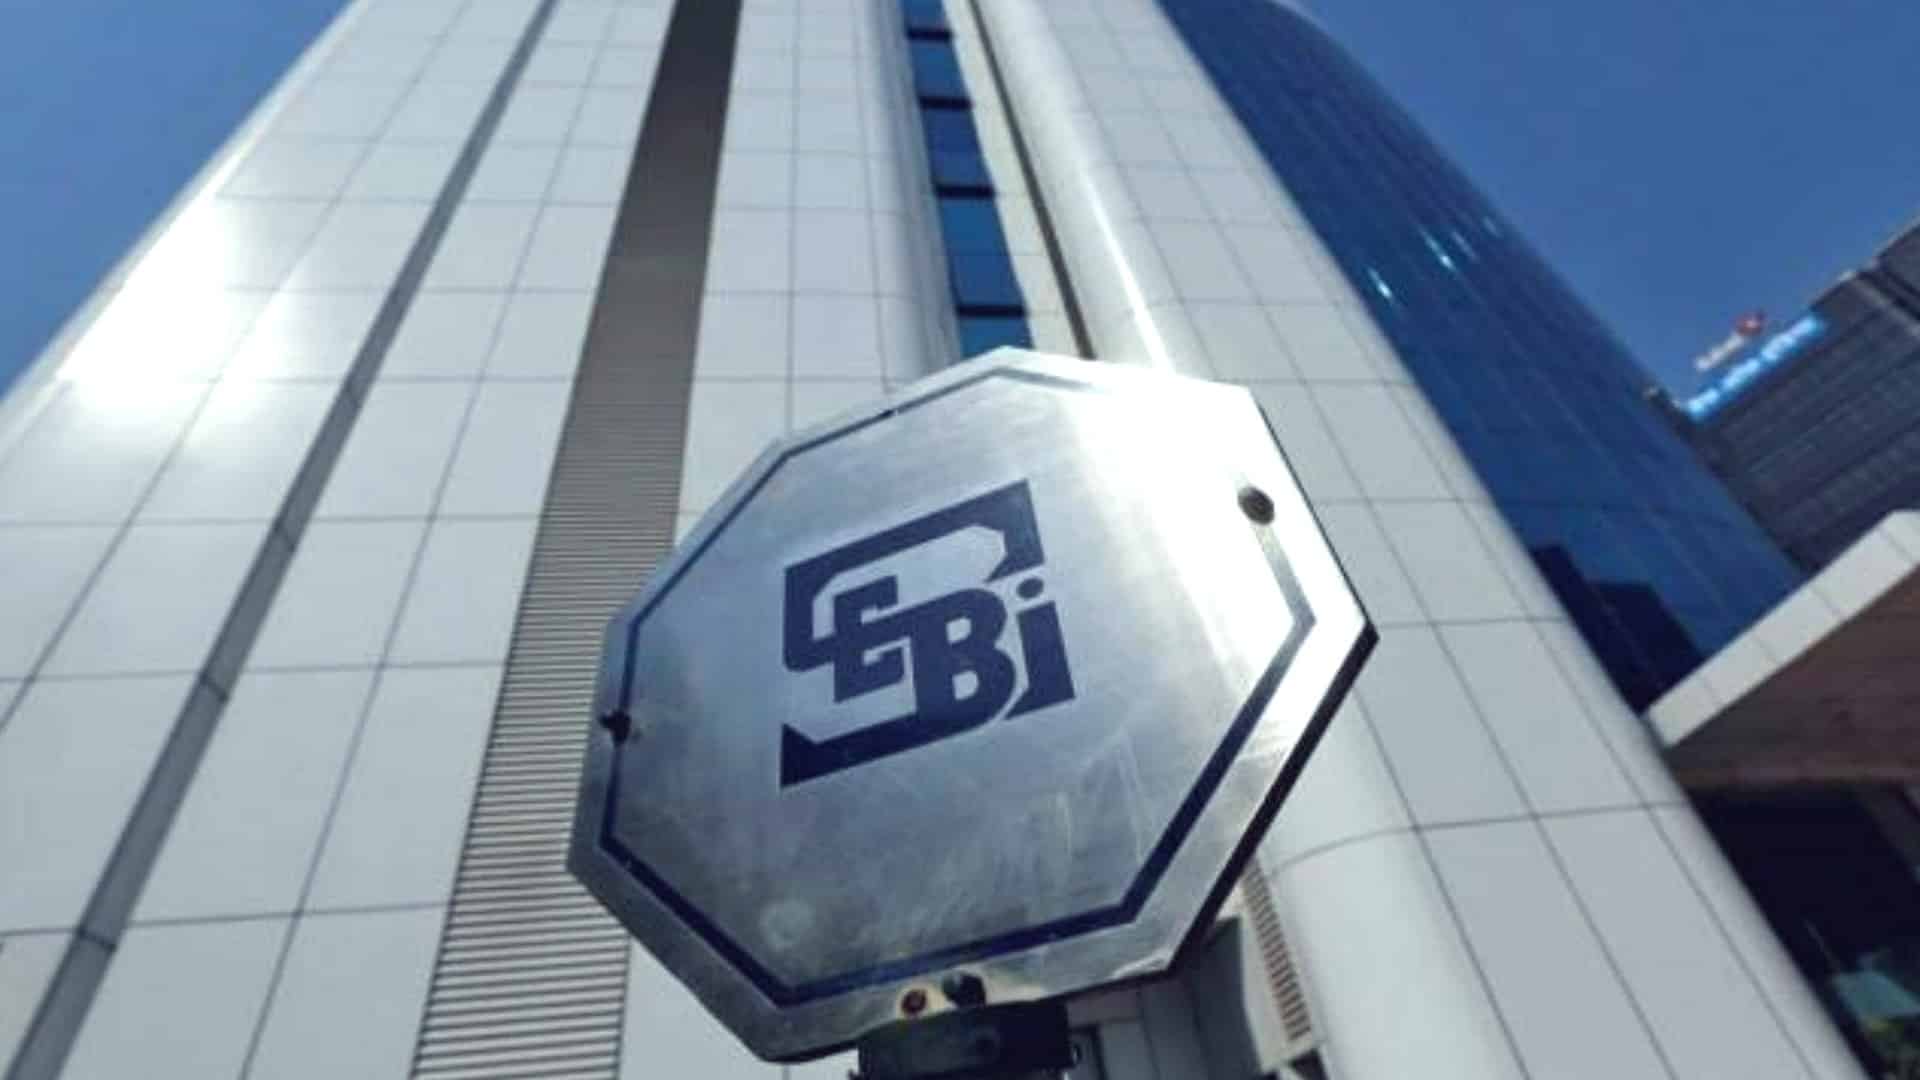 Sebi plans to rope in agency to address critical challenges for data analytics